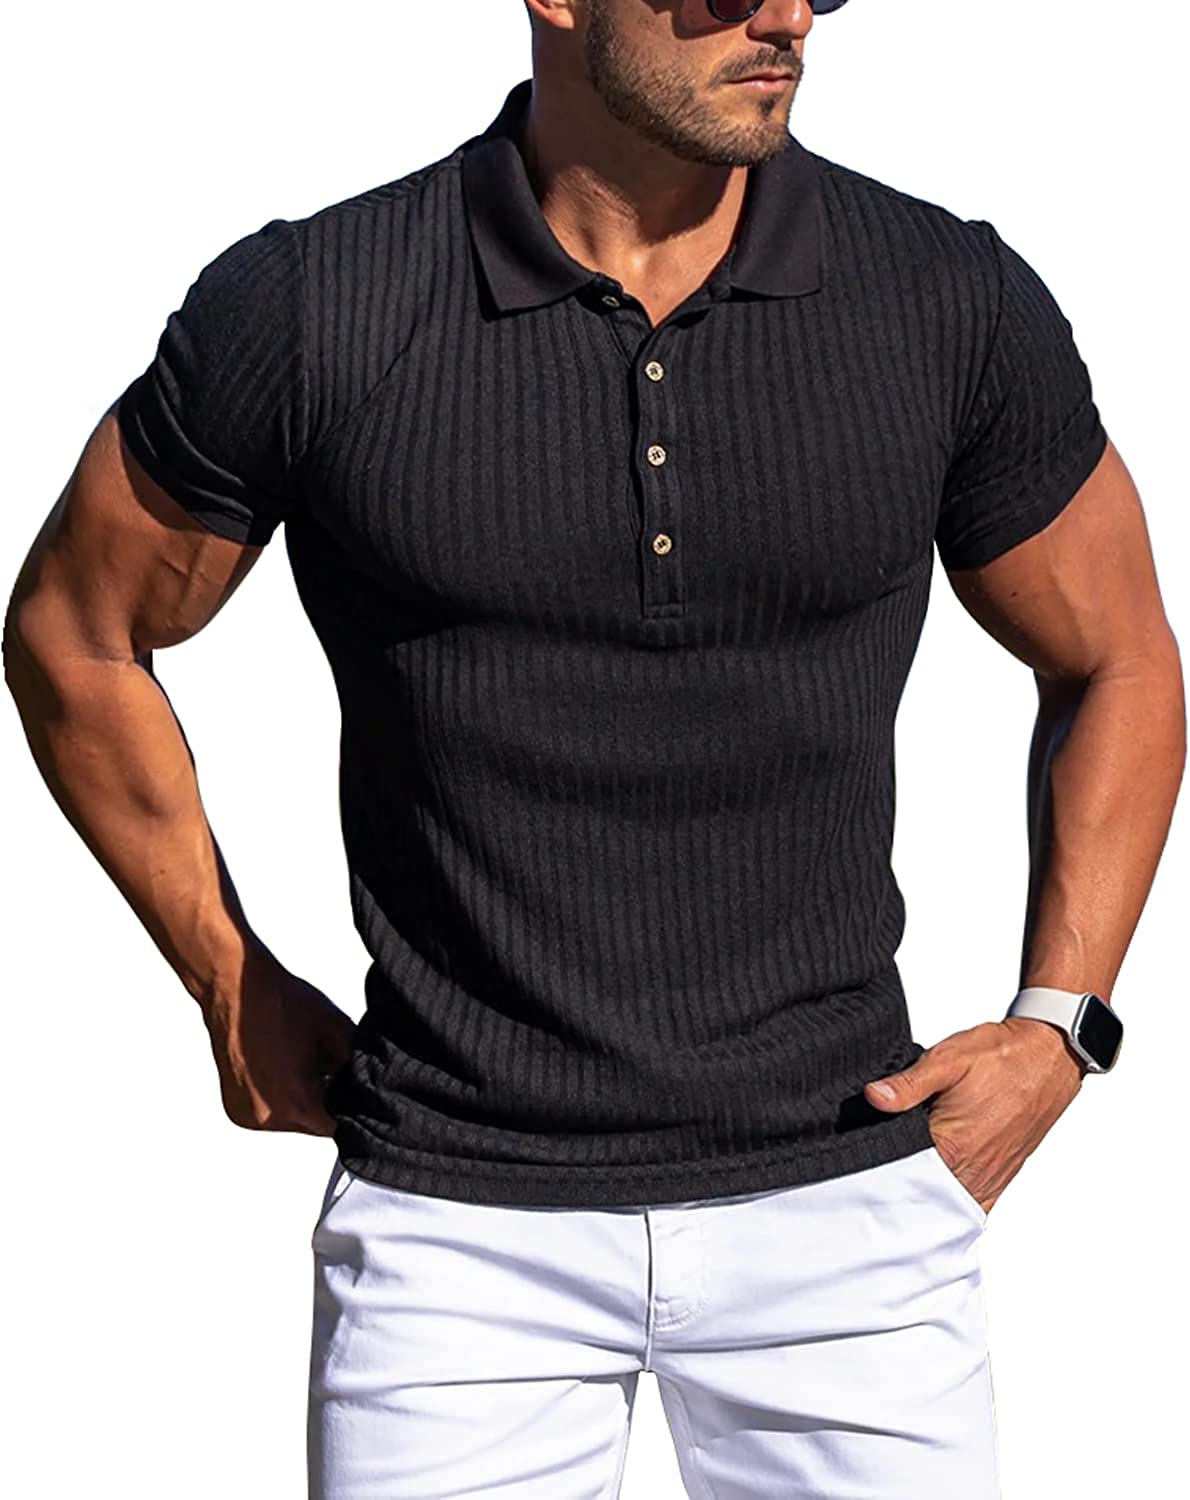 Muscle Polo Shirts for Men Slim Fit Short